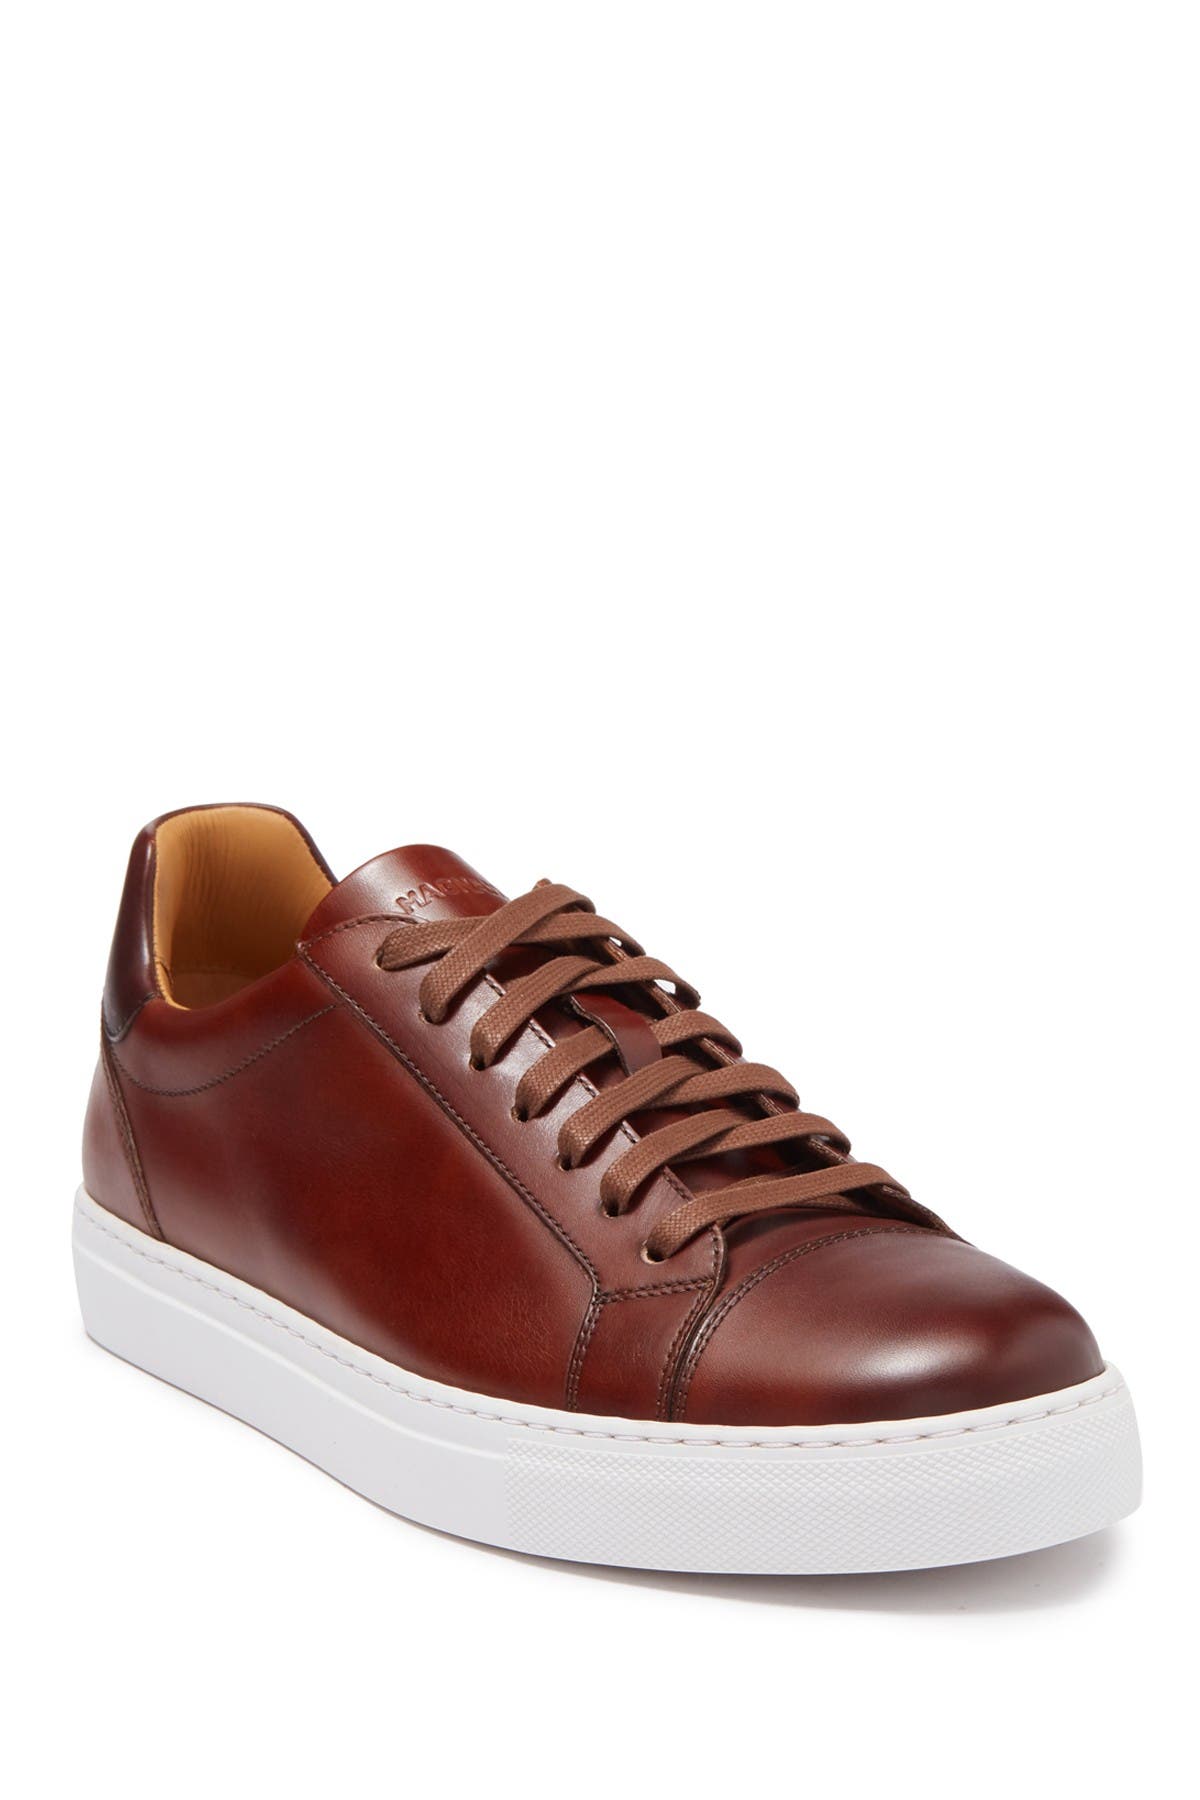 magnanni leather sneakers